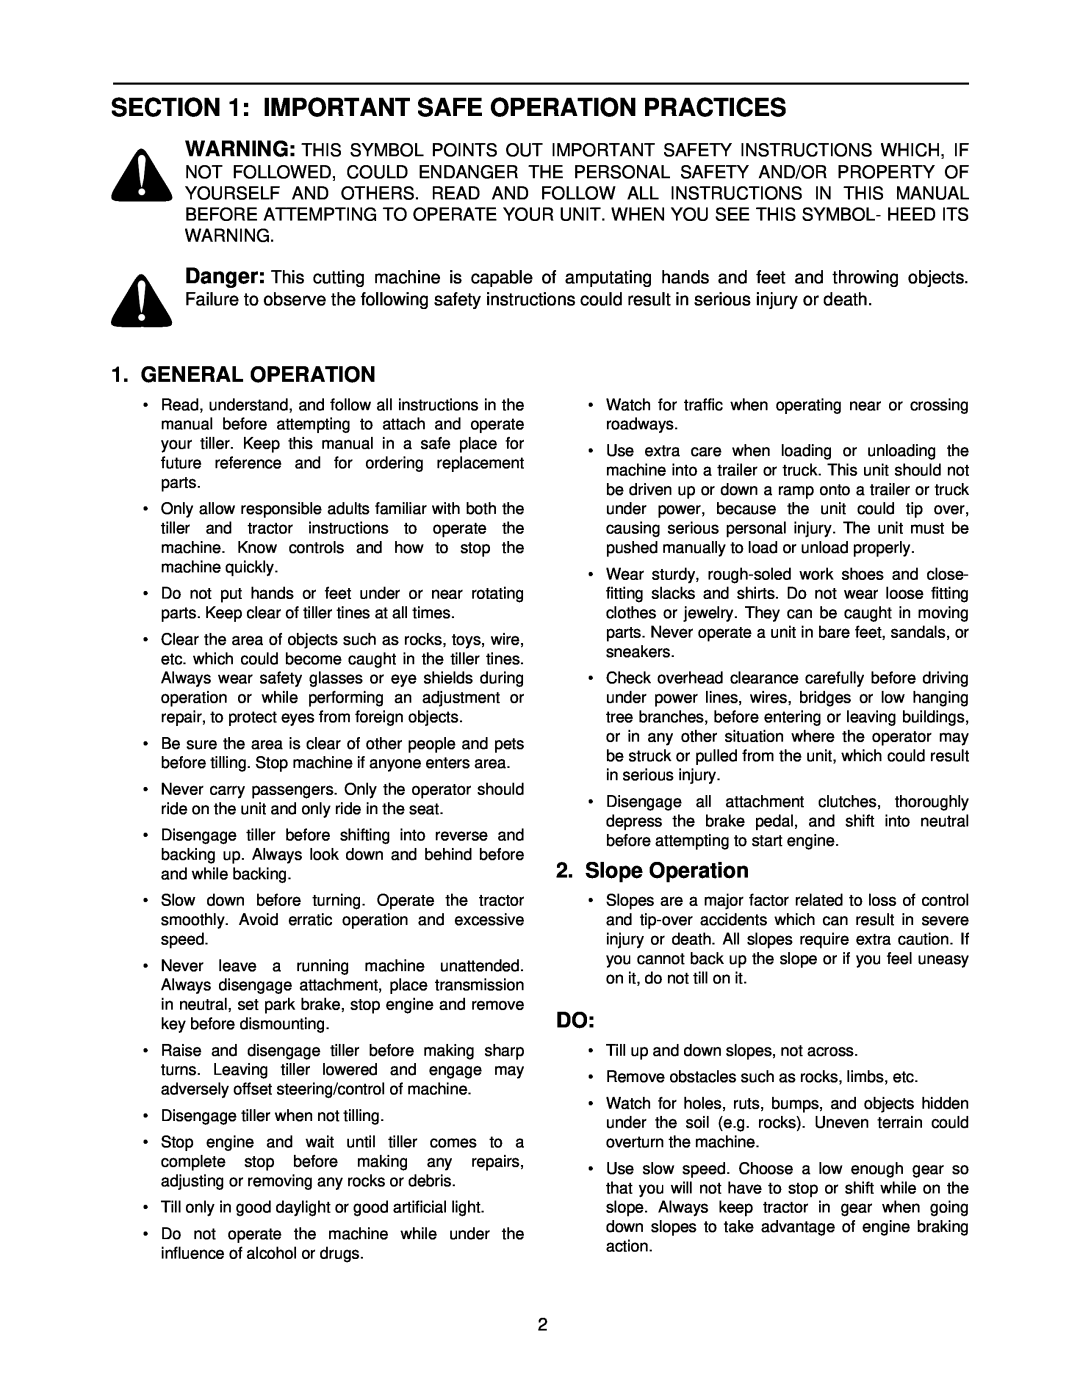 Bolens 190-758 manual Important Safe Operation Practices, General Operation, Slope Operation 